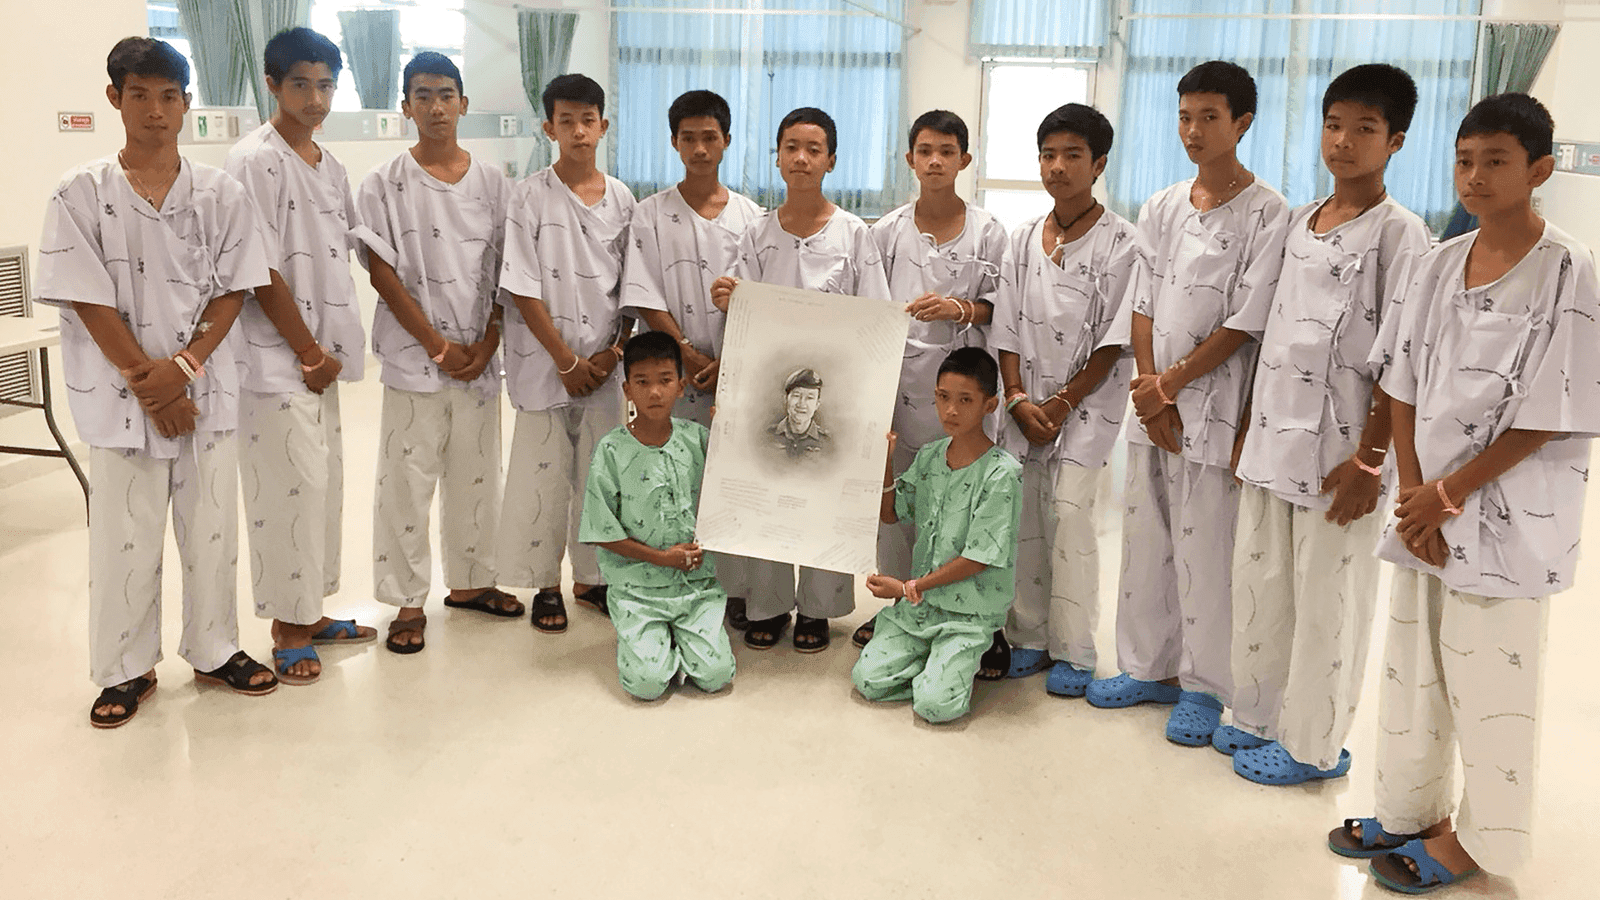 The Wold Boar soccer team and coach are in a Thai hospital after being rescued.